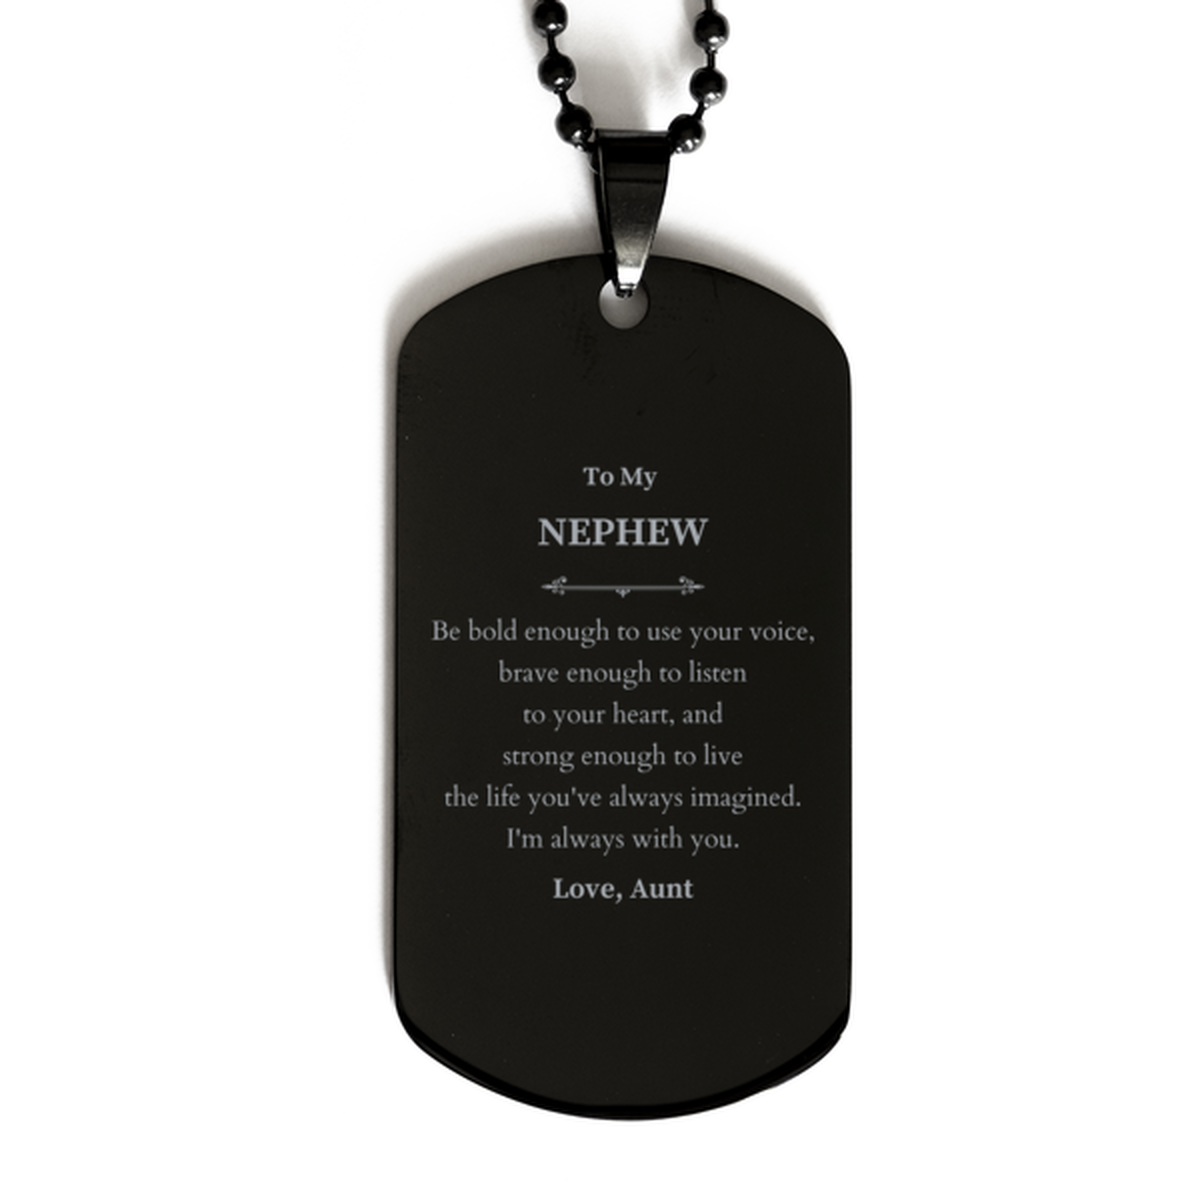 Keepsake Nephew Black Dog Tag Gift Idea Graduation Christmas Birthday Nephew from Aunt, Nephew Be bold enough to use your voice, brave enough to listen to your heart. Love, Aunt